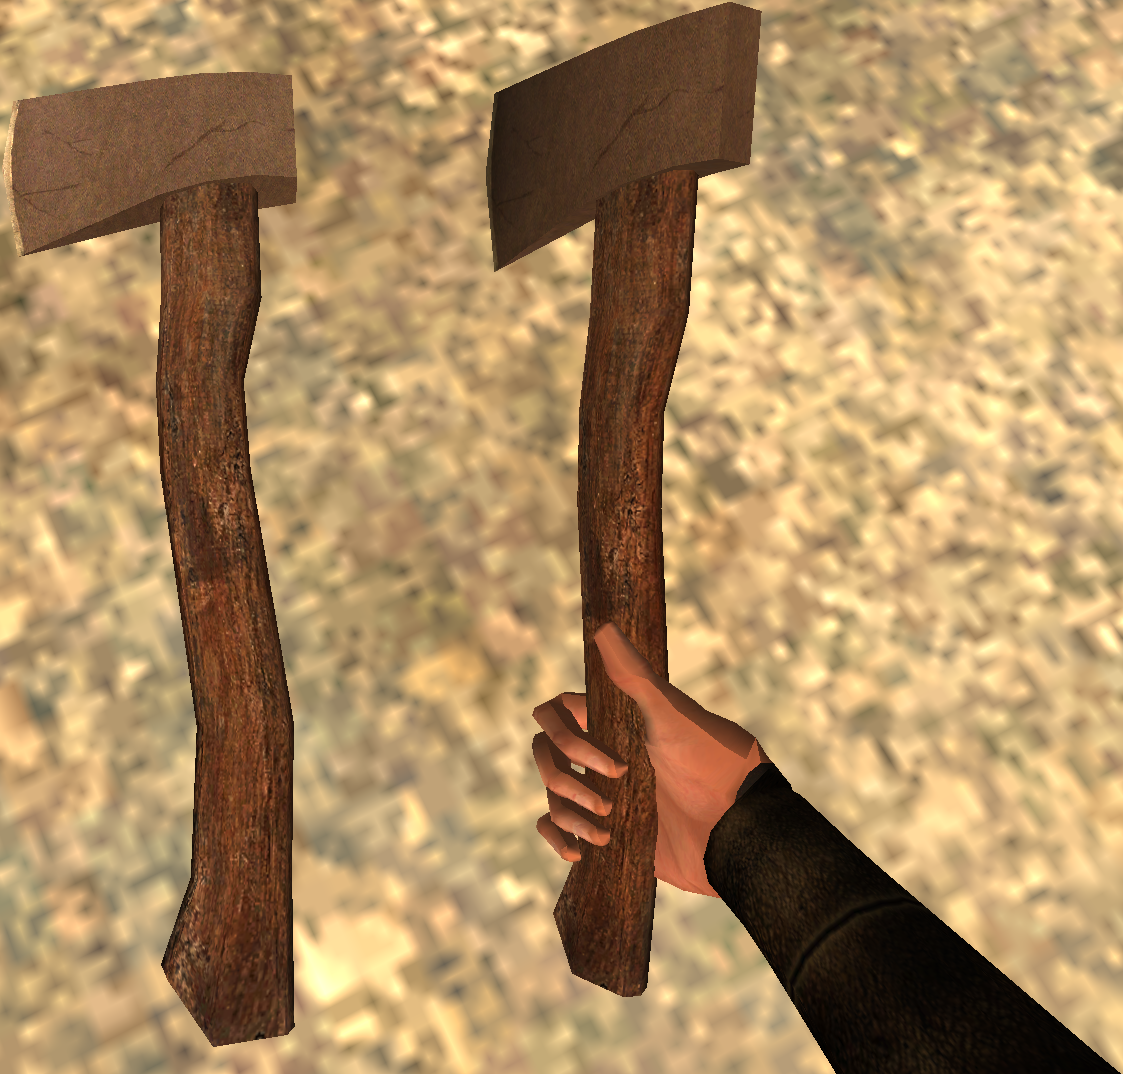 postal 2 share the pain free weapons